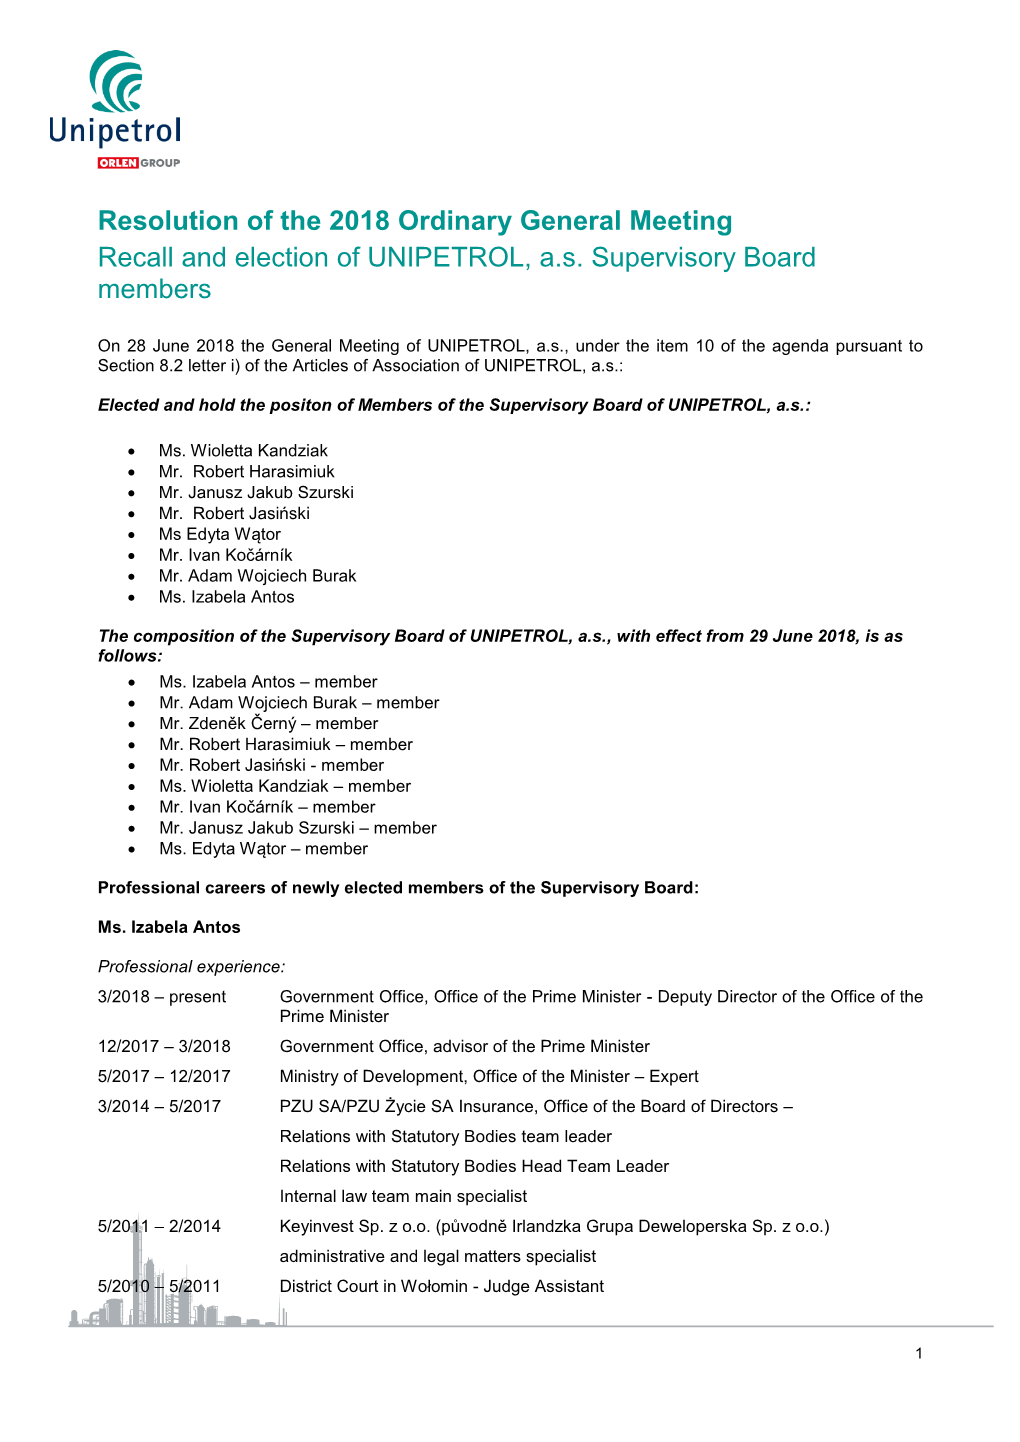 Resolution of the 2018 Ordinary General Meeting Recall and Election of UNIPETROL, A.S